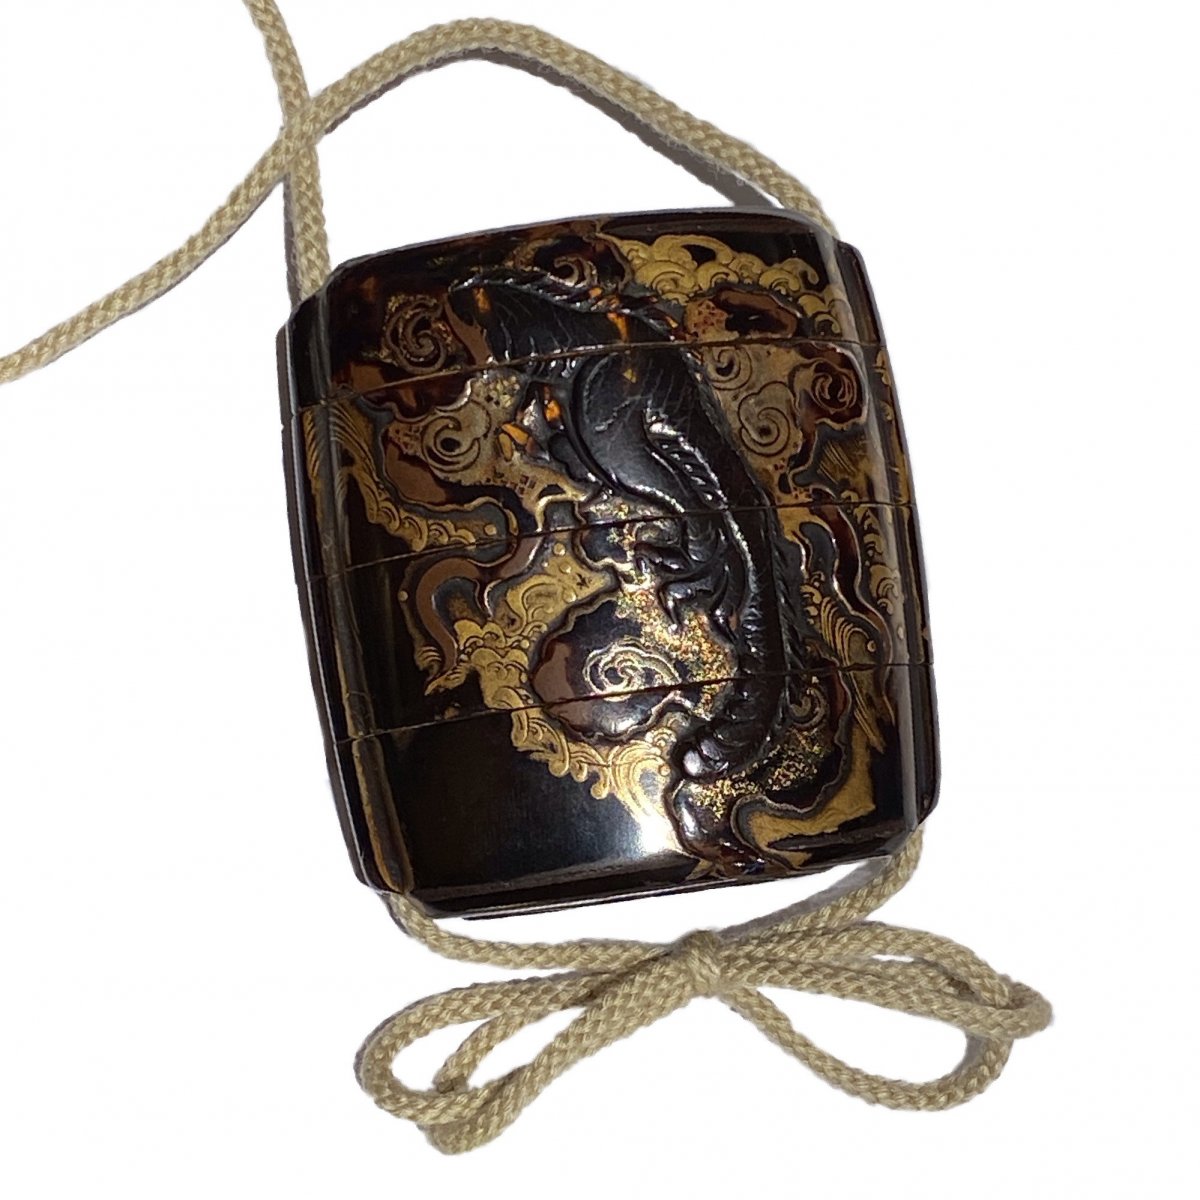 Japan, A Japanese Lacquer And Tortoiseshell Inro, Edo Period, Early 18th Century-photo-2